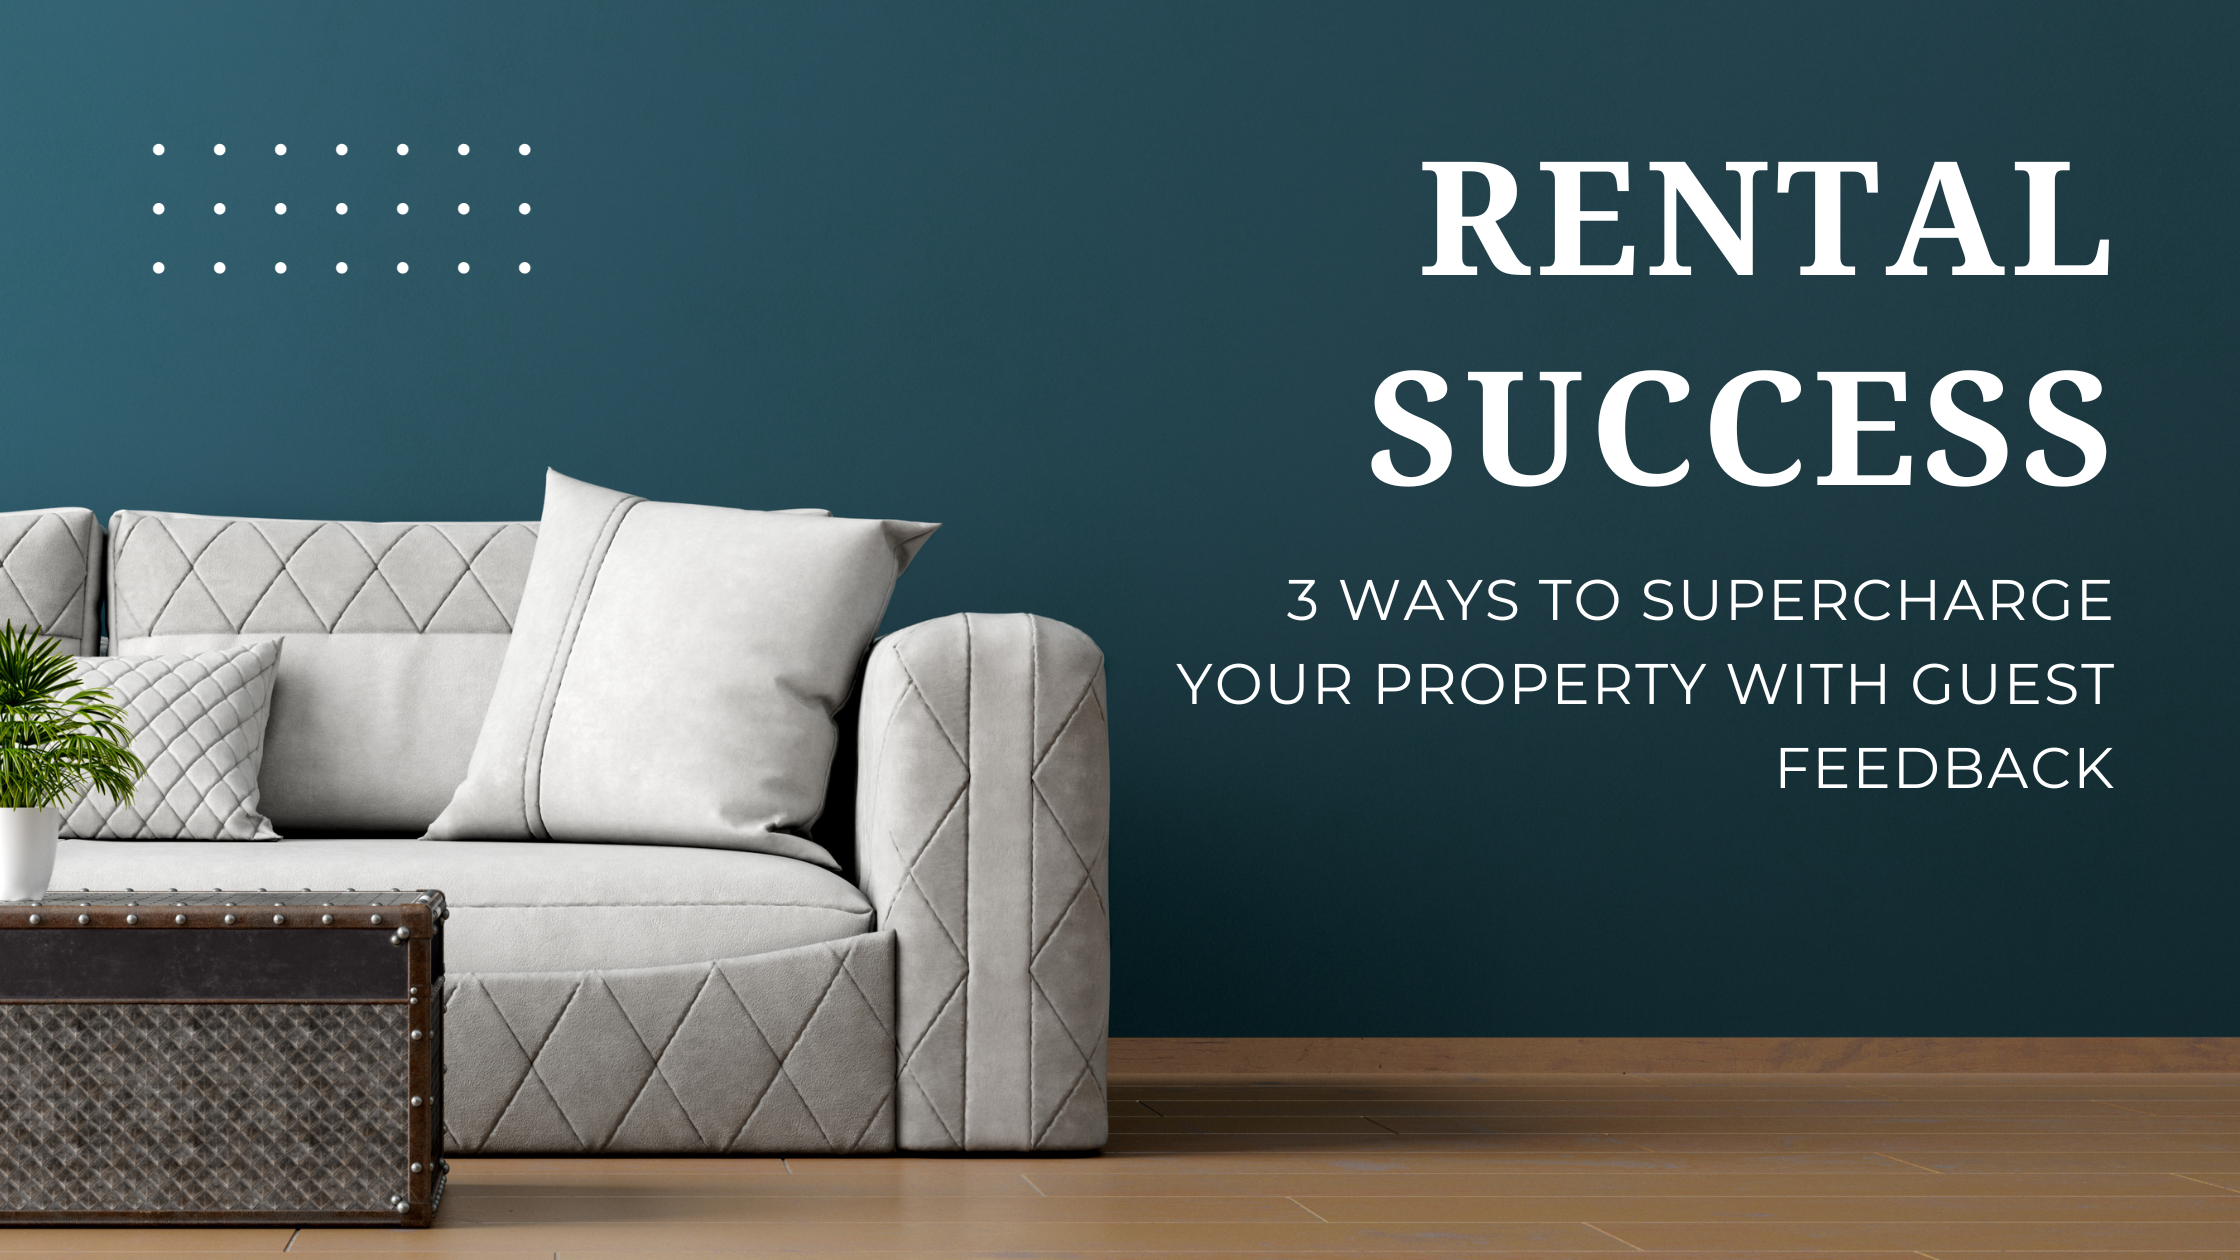 Cranking Up Your Rental Success: 3 Ways to Supercharge Your Property with Guest Feedback